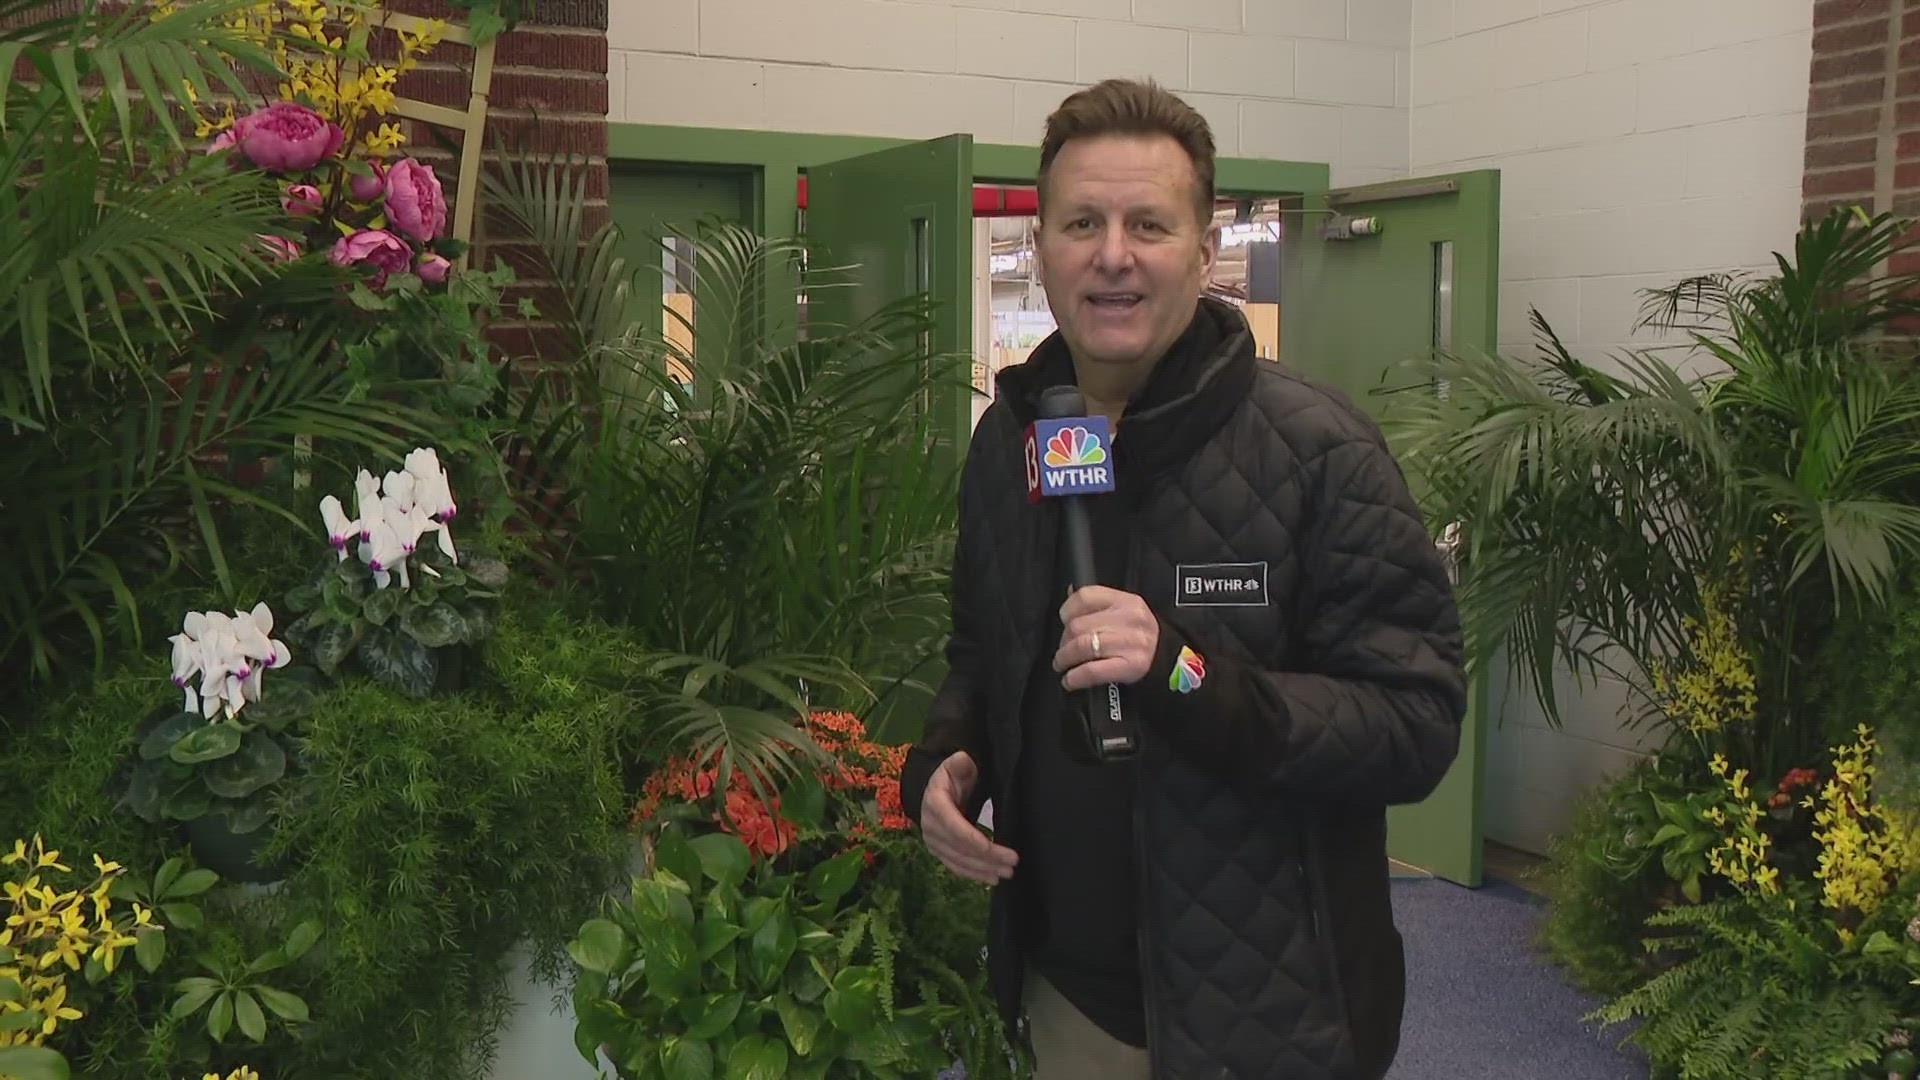 13Sports director Dave Calabro heads to the Indianapolis Home Show looking for people to tell him their Good News!